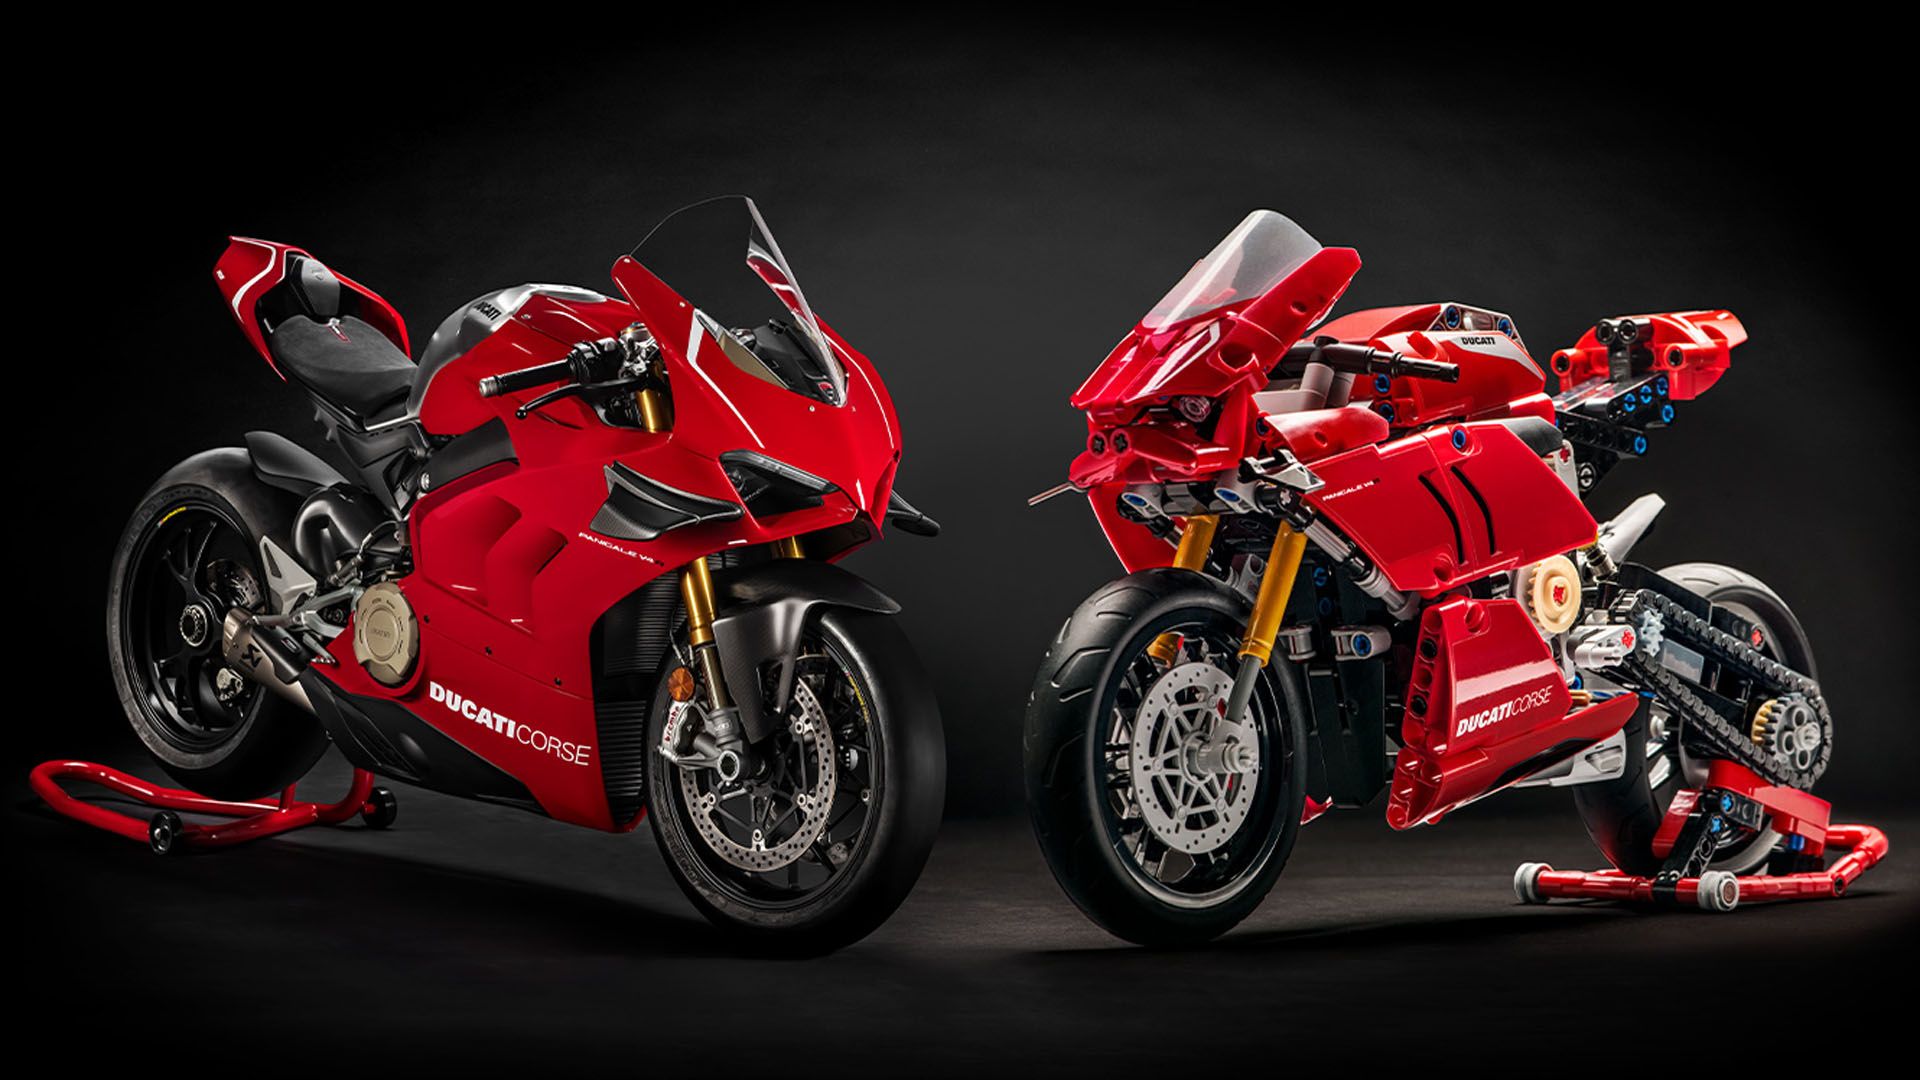 Red Ducati Panigale V4 R Superbike With Its LEGO Technic Model 42107 